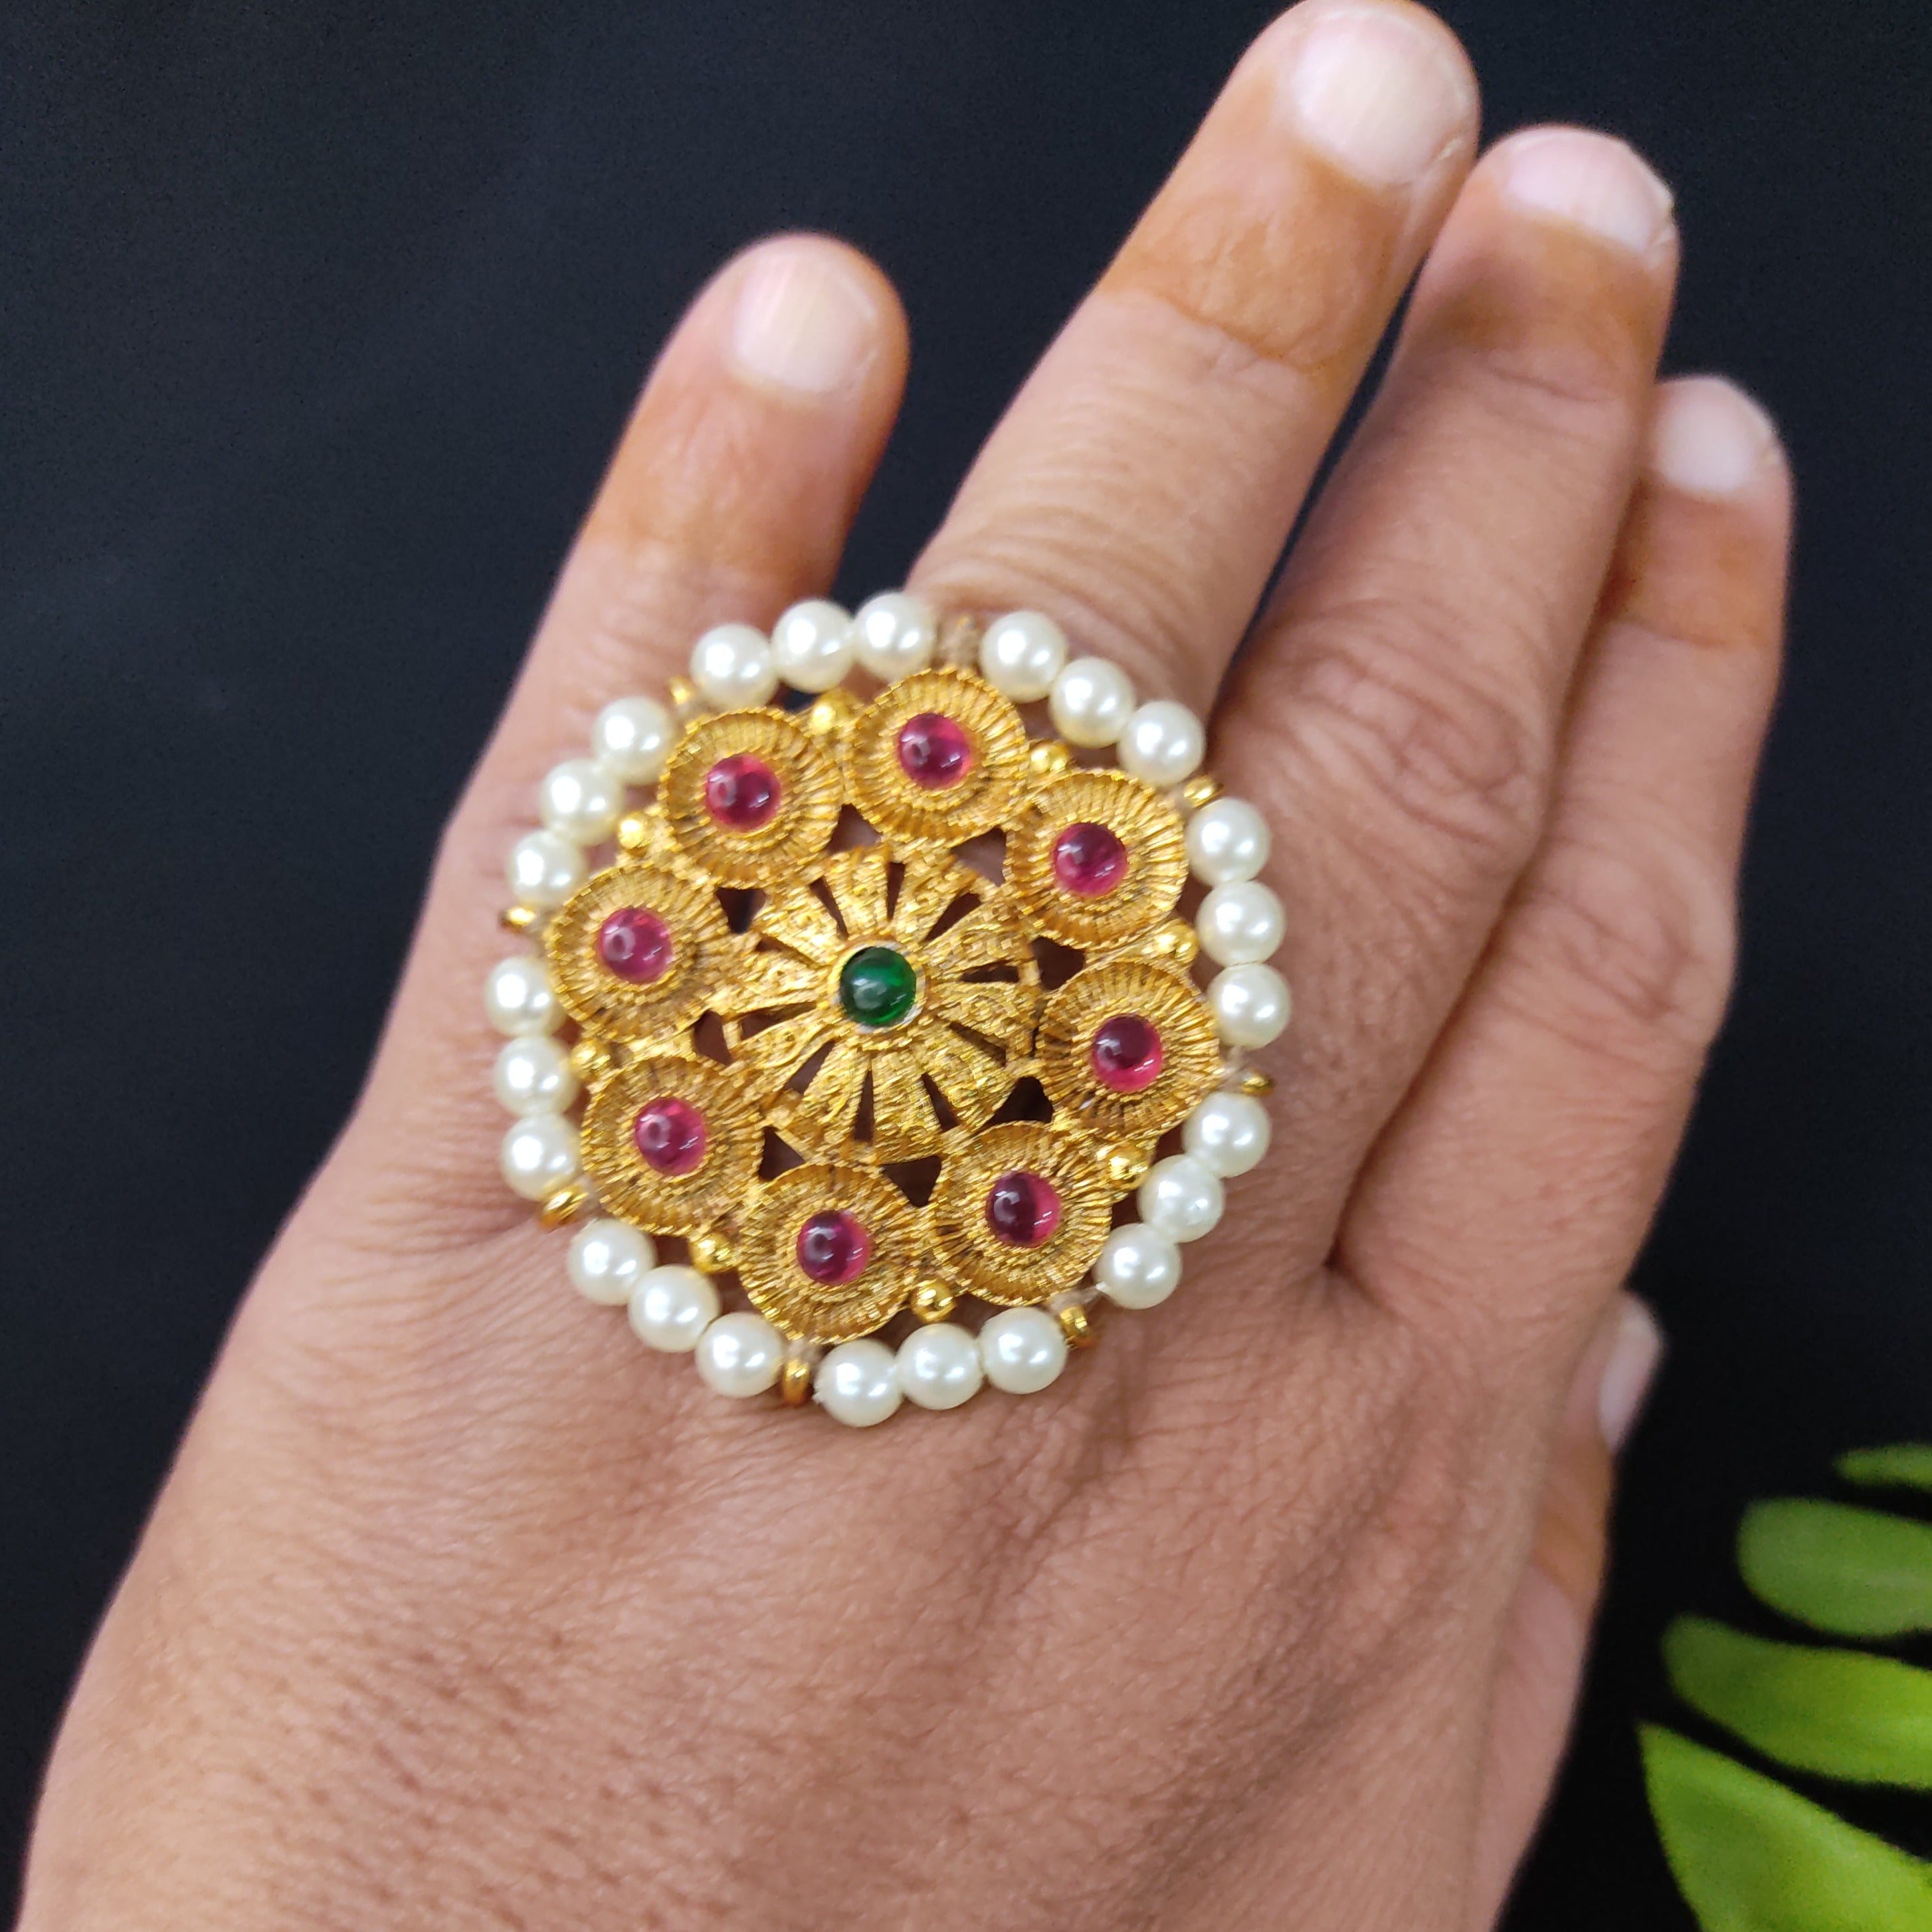 Amazon.com: Red Pear Shape Kundan 2 Finger Ring Linked With Pearl Chain.  Adjustable Double Rings. Teardrop White Kundan Flower. Ethnic Fashion  Jewelry Handmade Unique Traditional Jewelry Pearl Ring Flower Ring :  Handmade